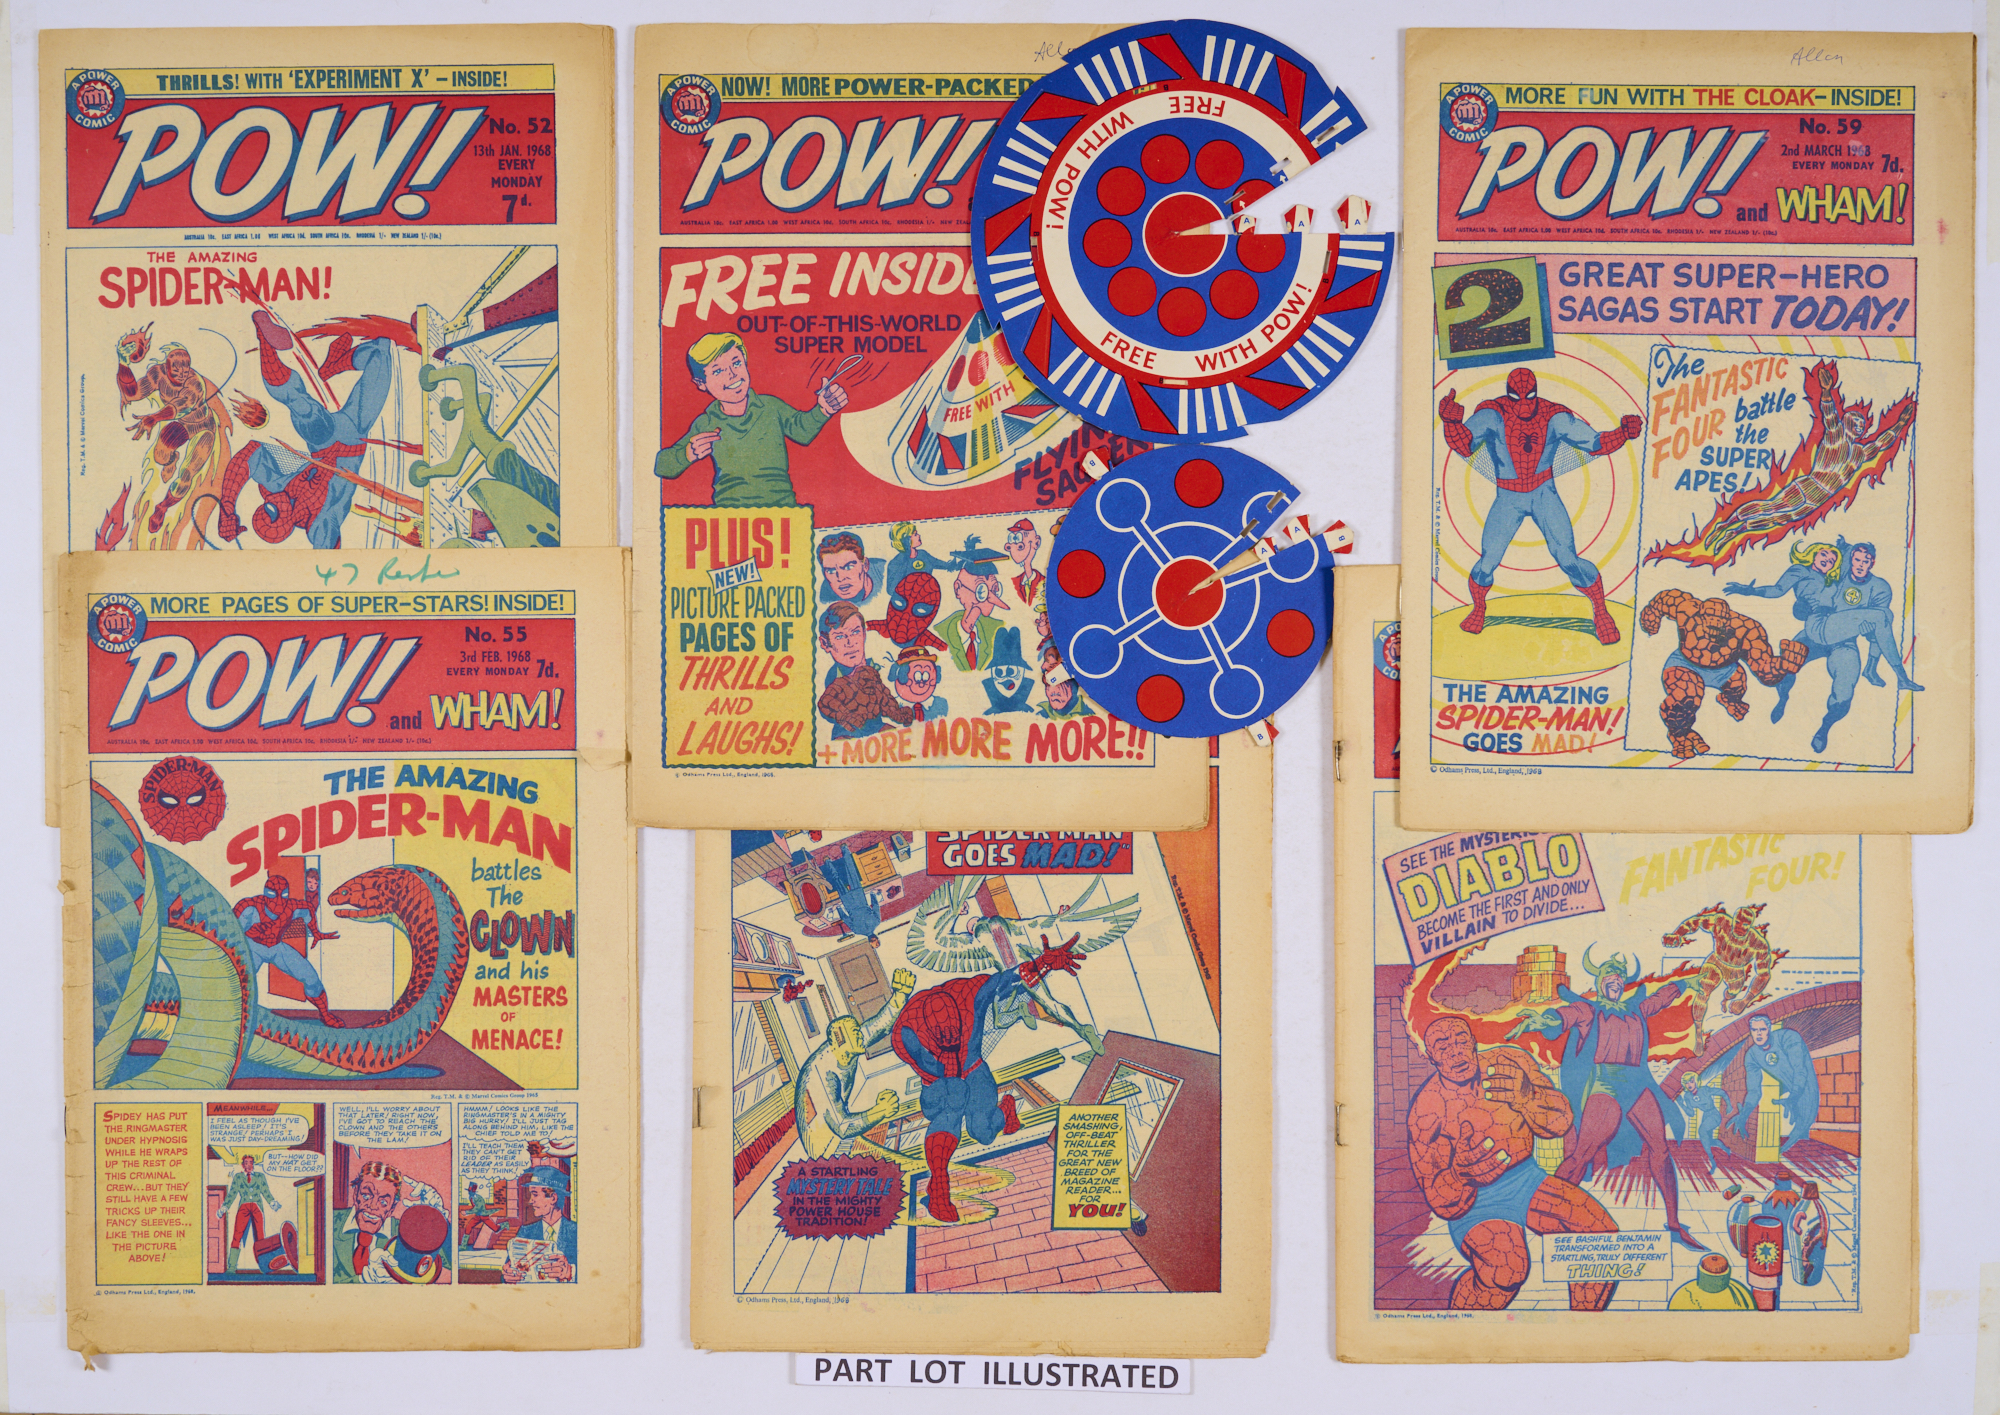 POW! (1968) 51-86 (final issue) No 53 wfg Flying Saucer (lacking press-out card). Reprinting U.S.